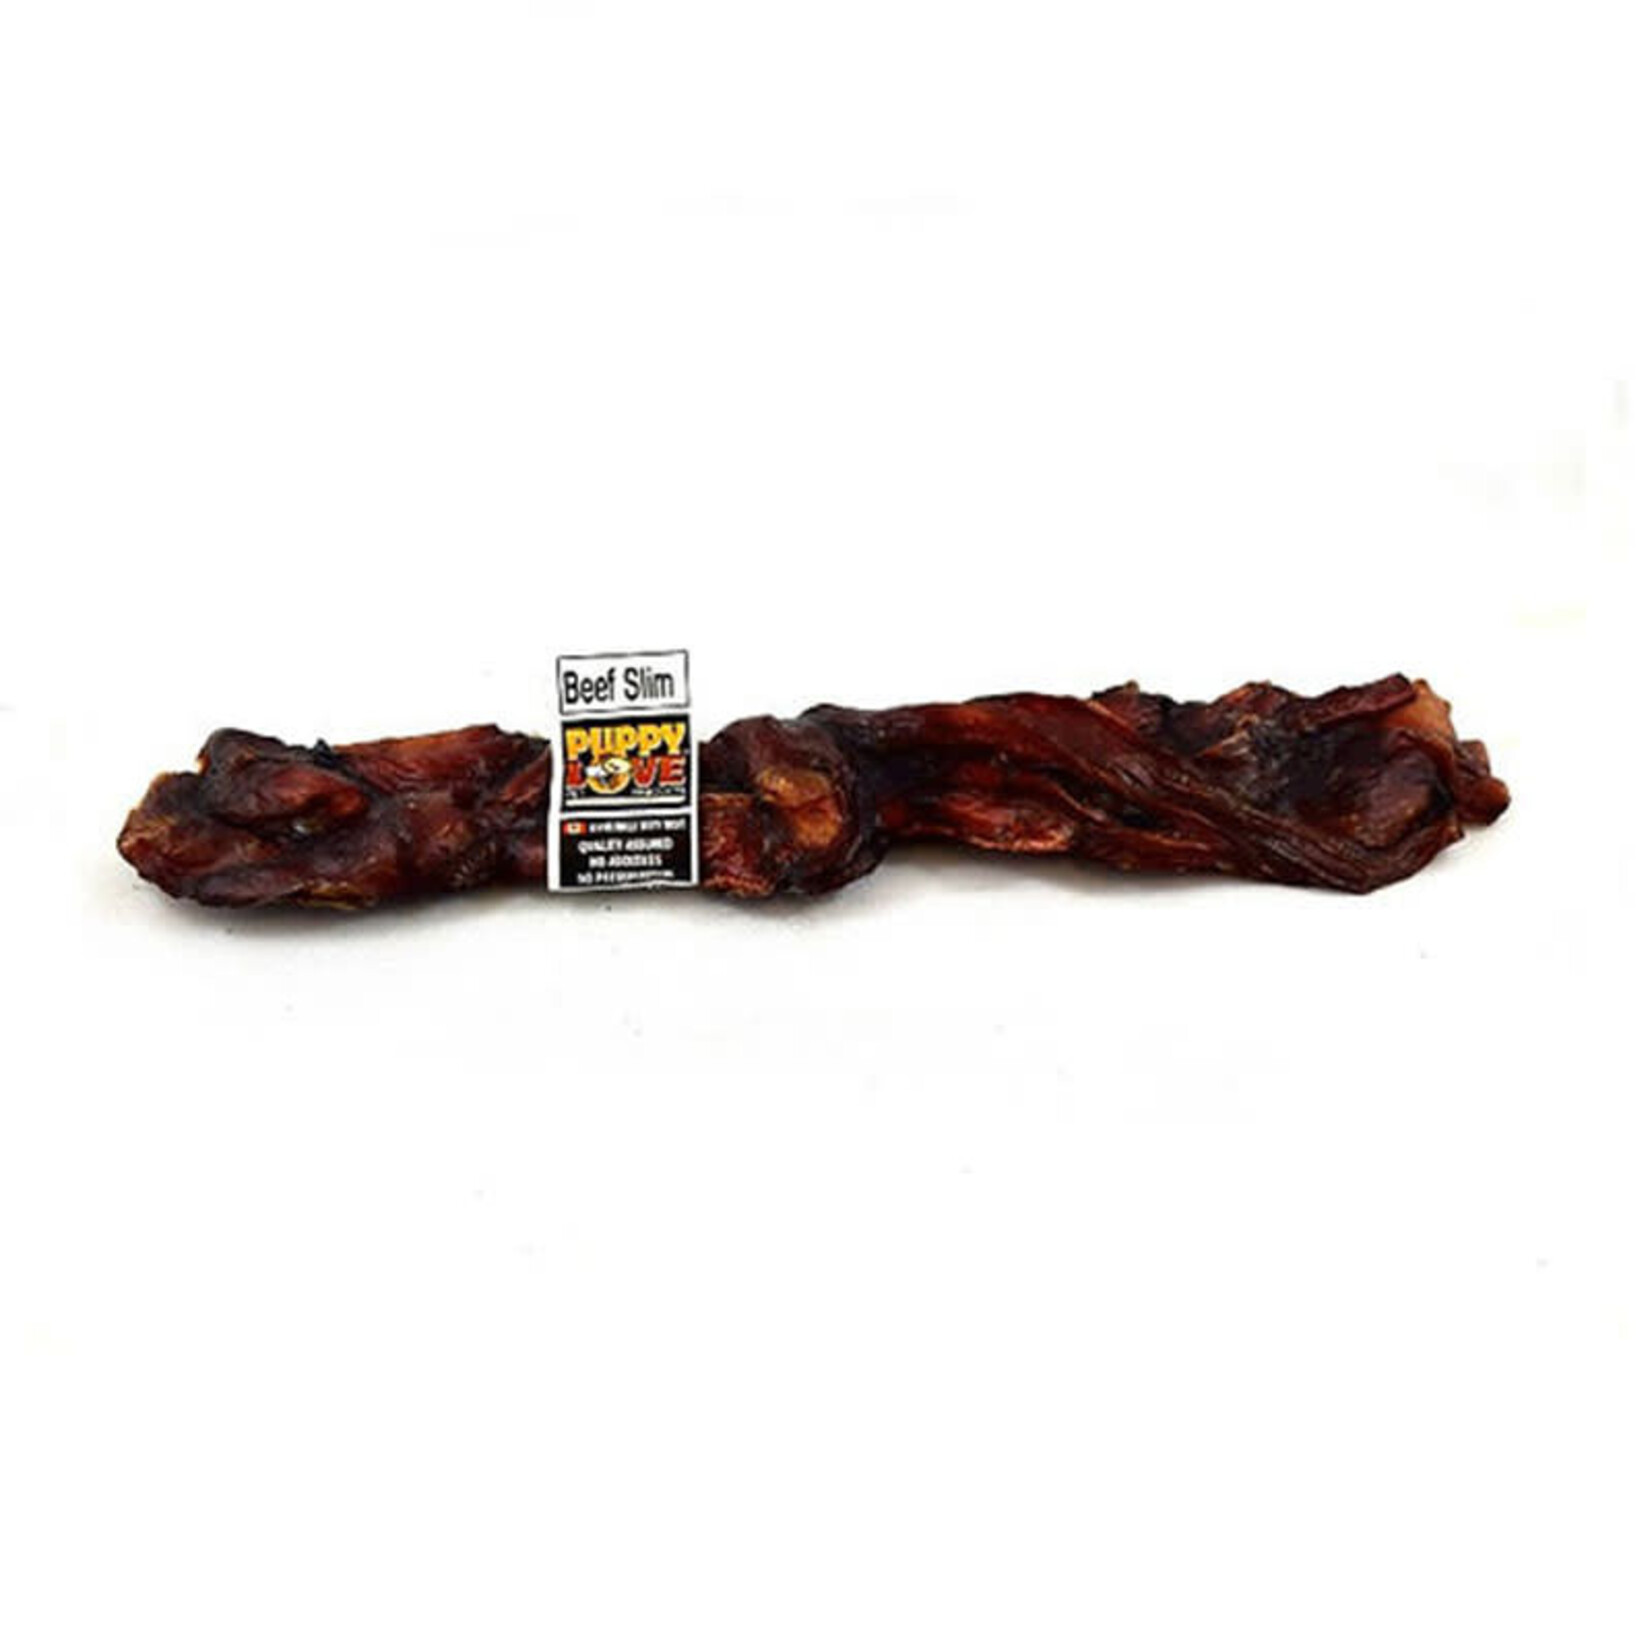 Puppy Love Pet Products Puppy Love - Beef Slim - 5 pack